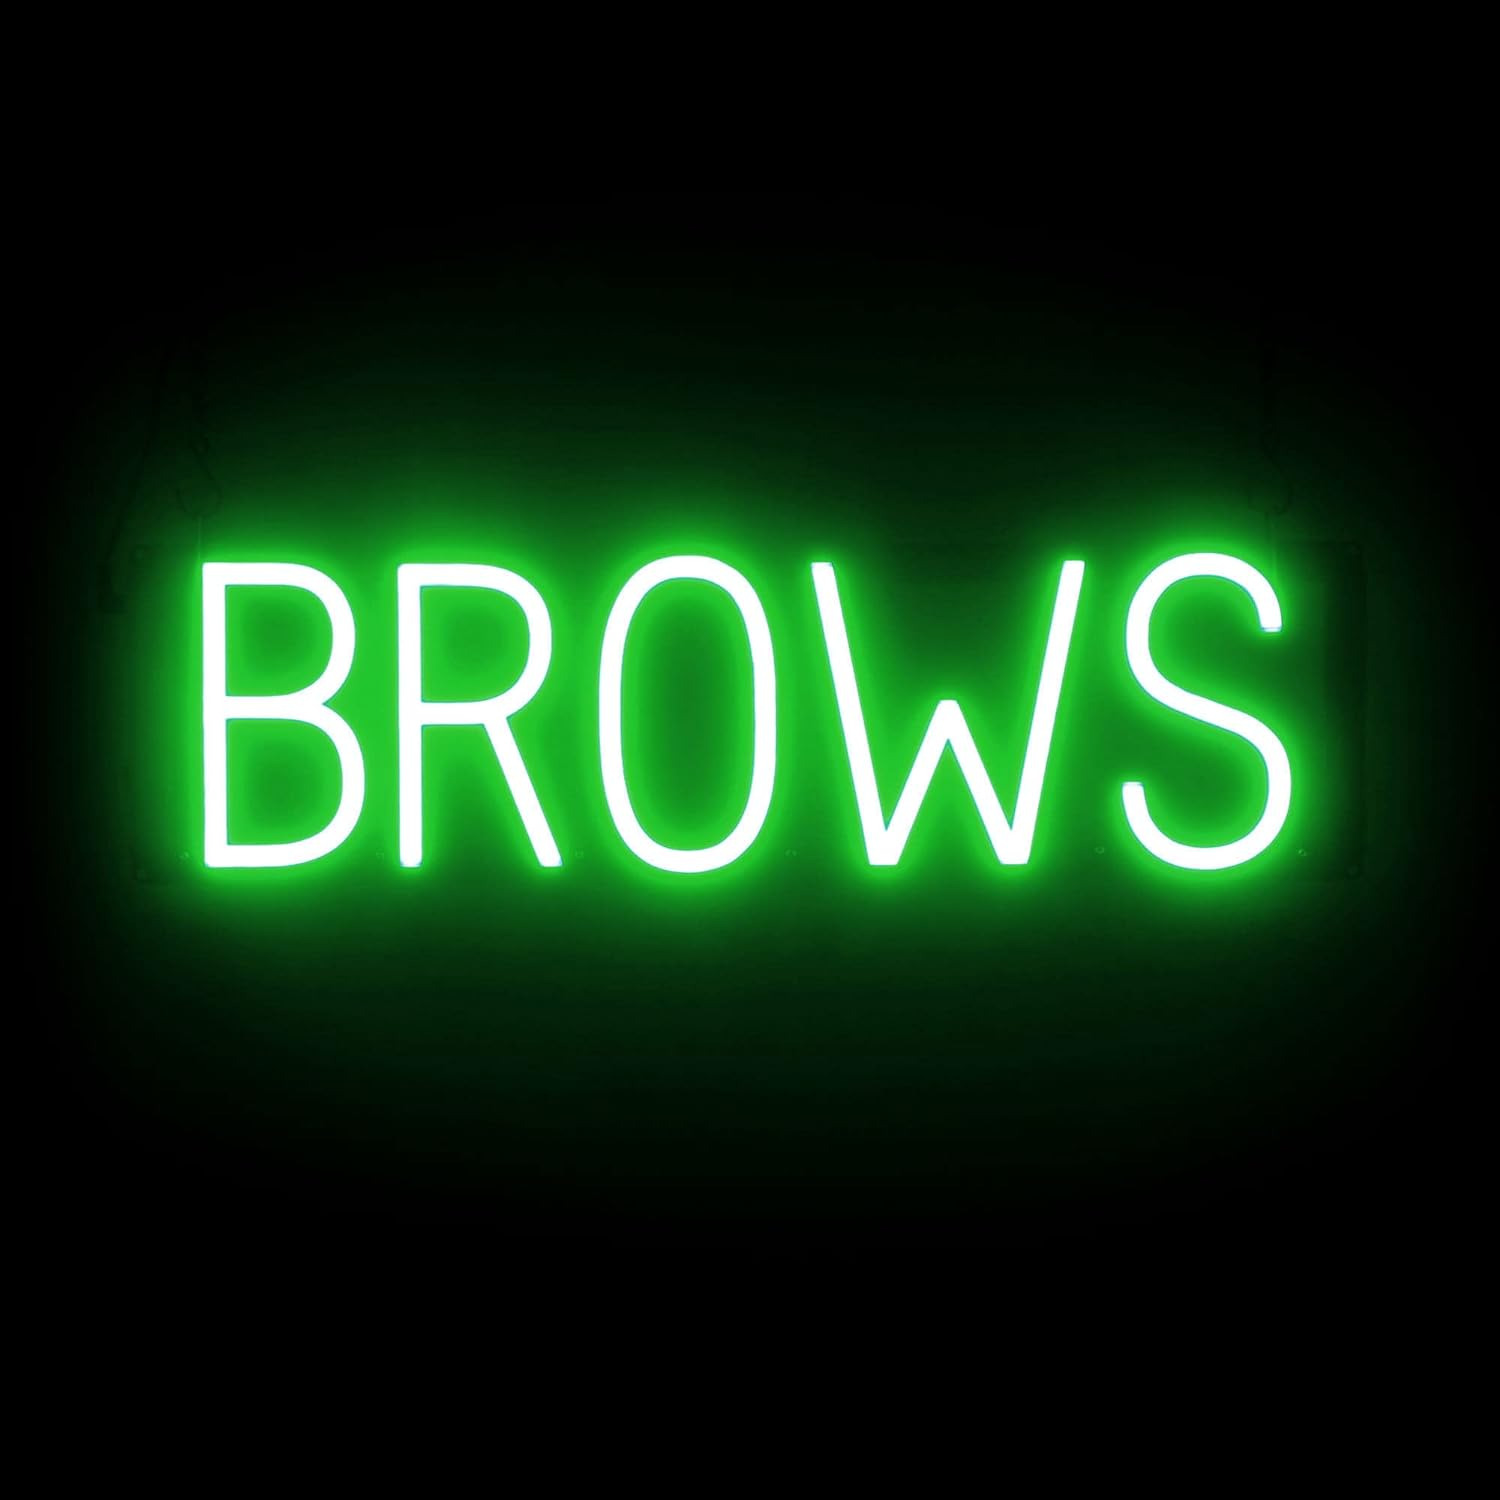 BROWS Neon-Led Sign for Beauty Salons. 22.6\